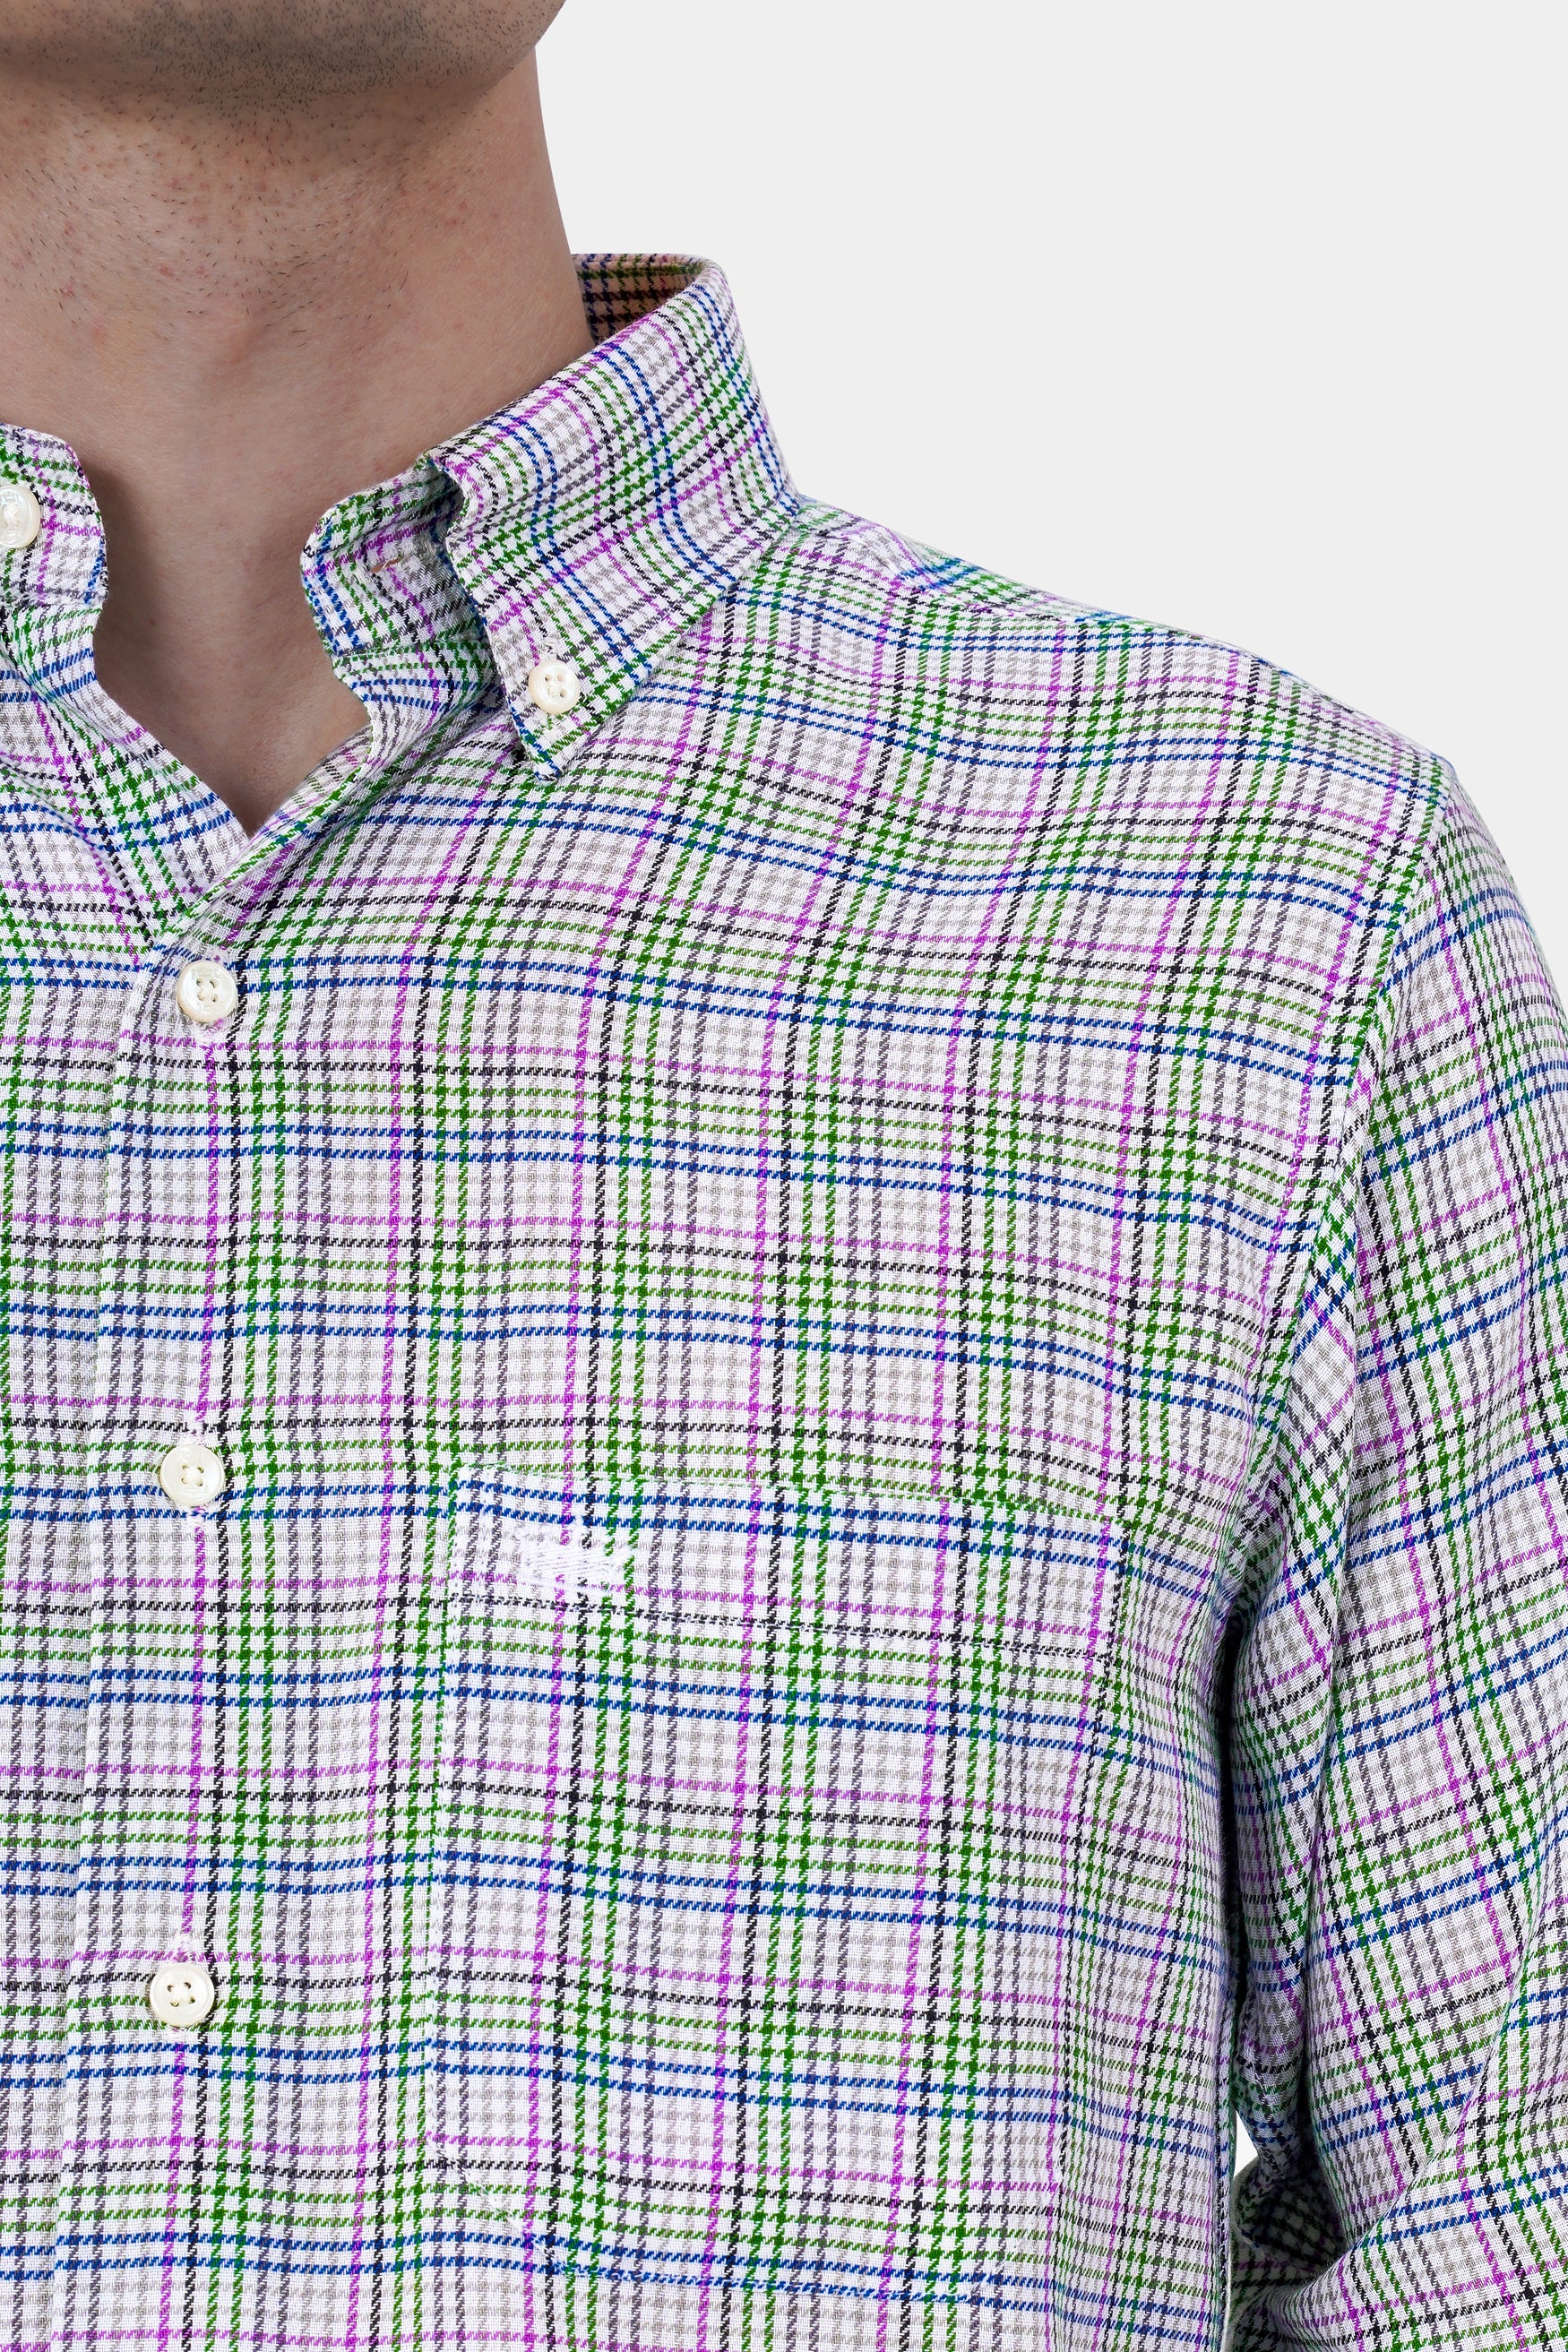 Bright White with Matcha Green and Azure Blue Checkered Houndstooth Shirt 11745-BD-38, 11745-BD-H-38, 11745-BD-39, 11745-BD-H-39, 11745-BD-40, 11745-BD-H-40, 11745-BD-42, 11745-BD-H-42, 11745-BD-44, 11745-BD-H-44, 11745-BD-46, 11745-BD-H-46, 11745-BD-48, 11745-BD-H-48, 11745-BD-50, 11745-BD-H-50, 11745-BD-52, 11745-BD-H-52